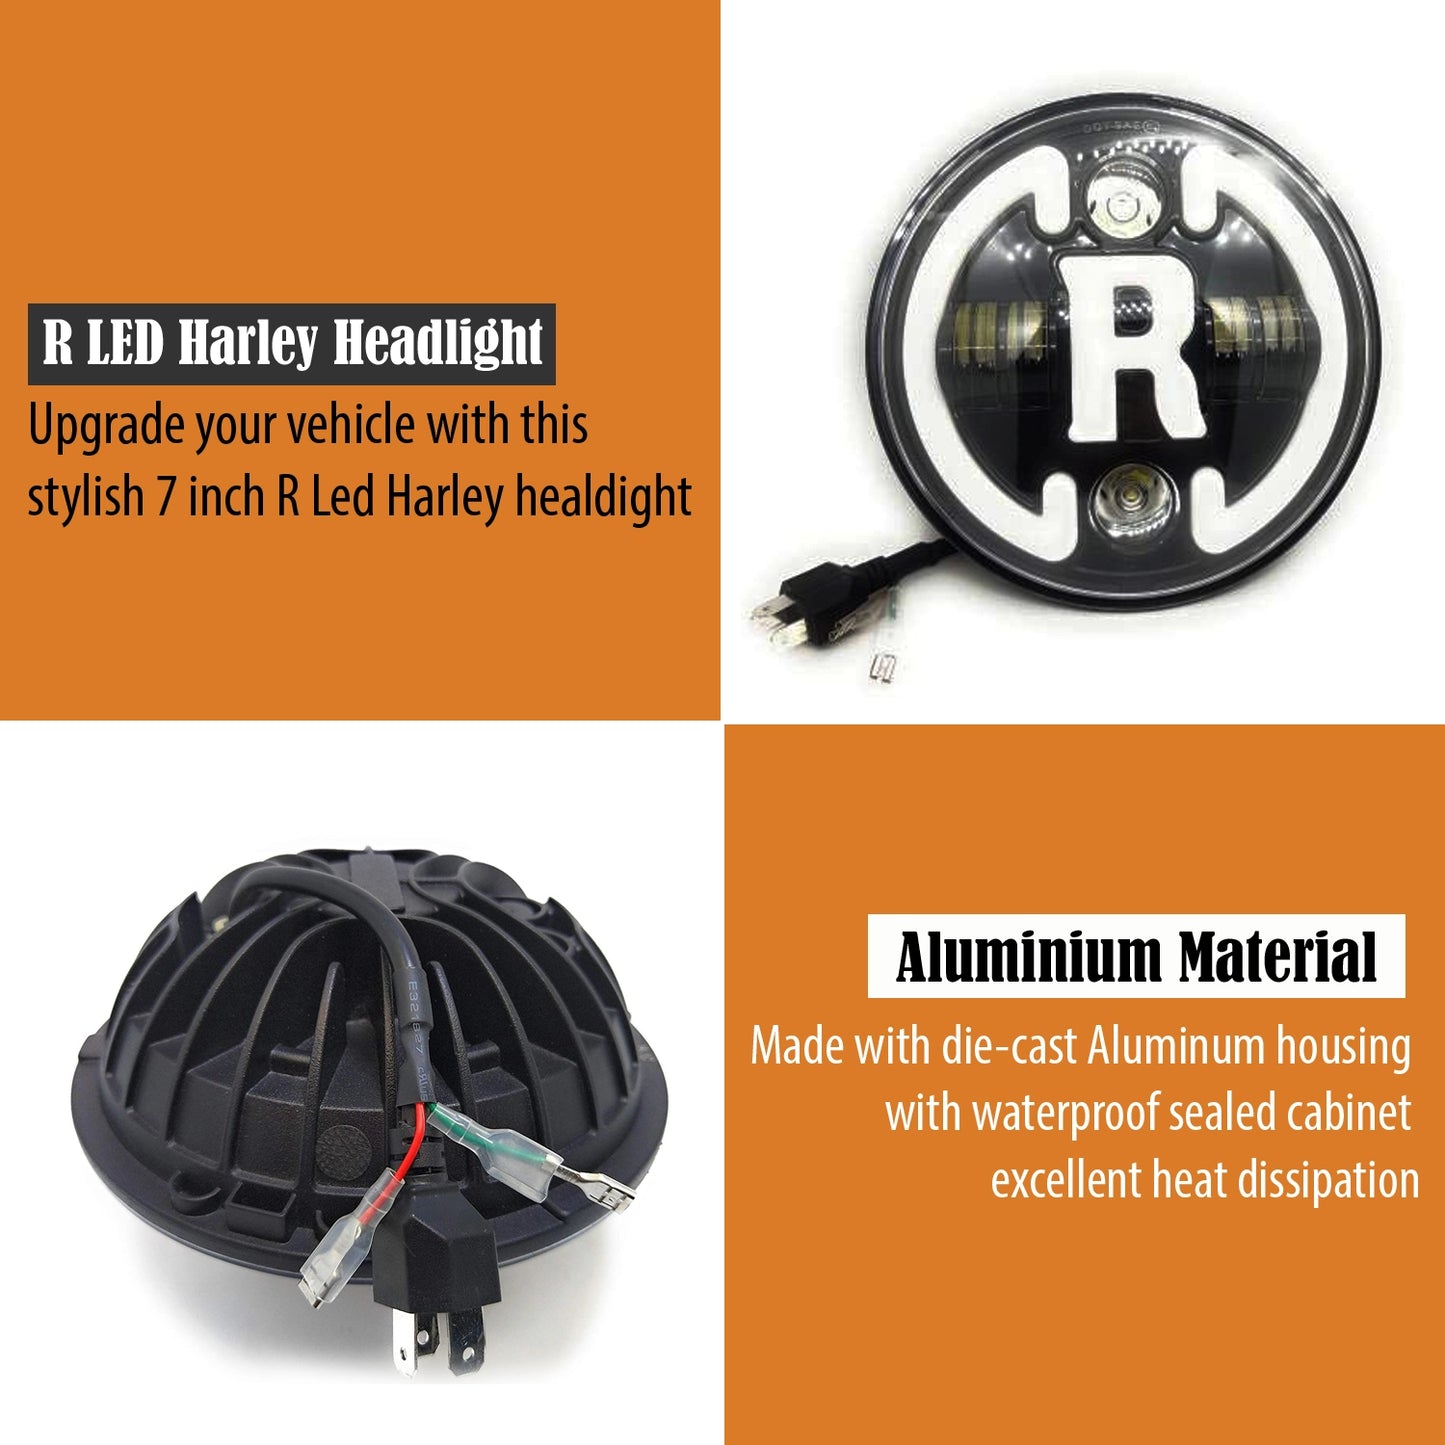 7 Inch Round Headlight Compatible with Royal Enfield, Jeep Thar & Harley Davidson (R White Harley Headlight) - bikerstore.in